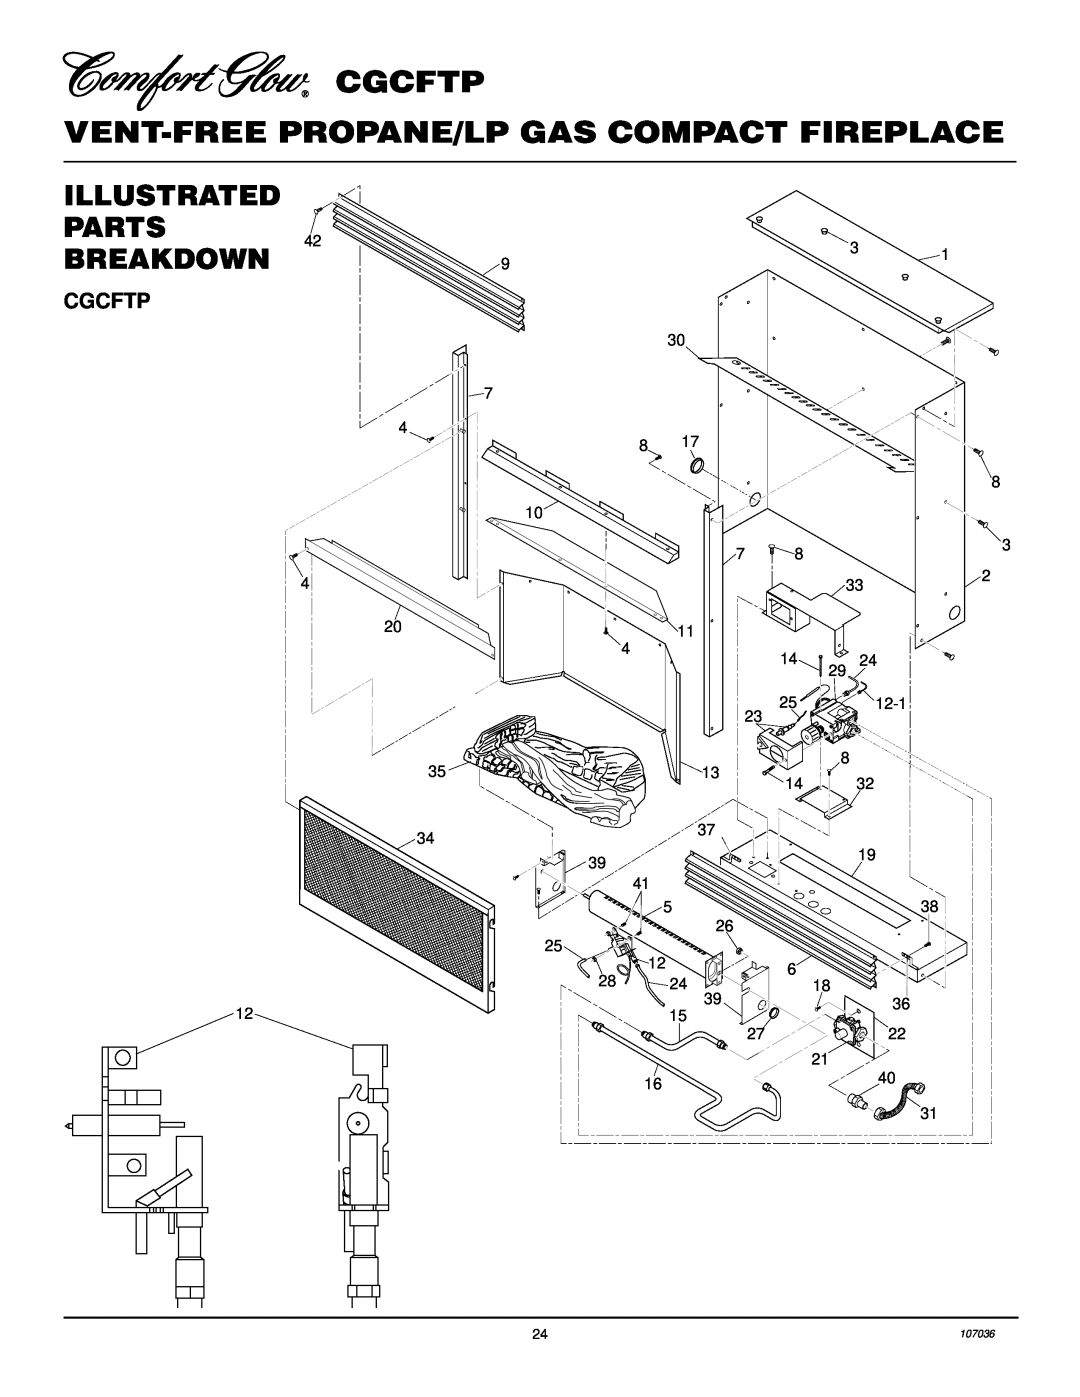 Desa 000 to 26, CGCFTP 14 Illustrated Parts, Breakdown, Cgcftp Vent-Freepropane/Lp Gas Compact Fireplace 